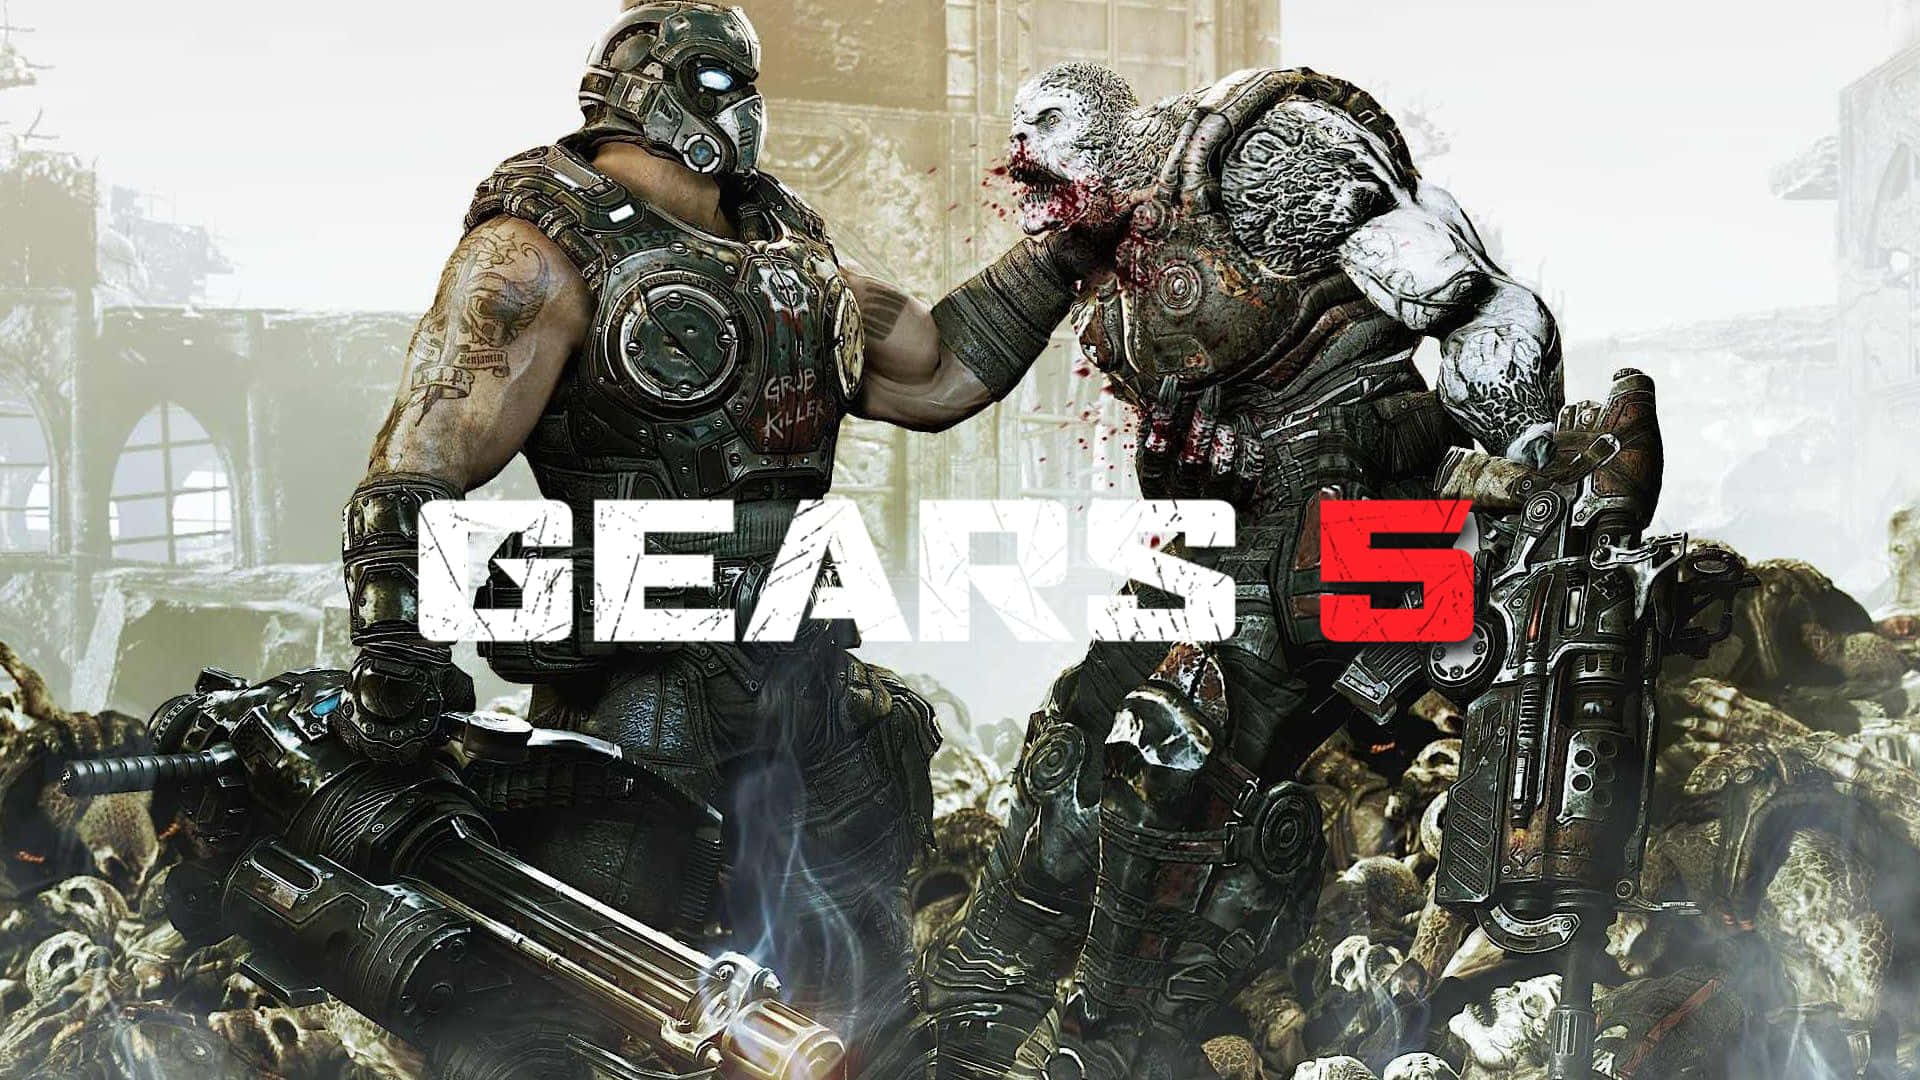 Battle through the night with Gears of War 5